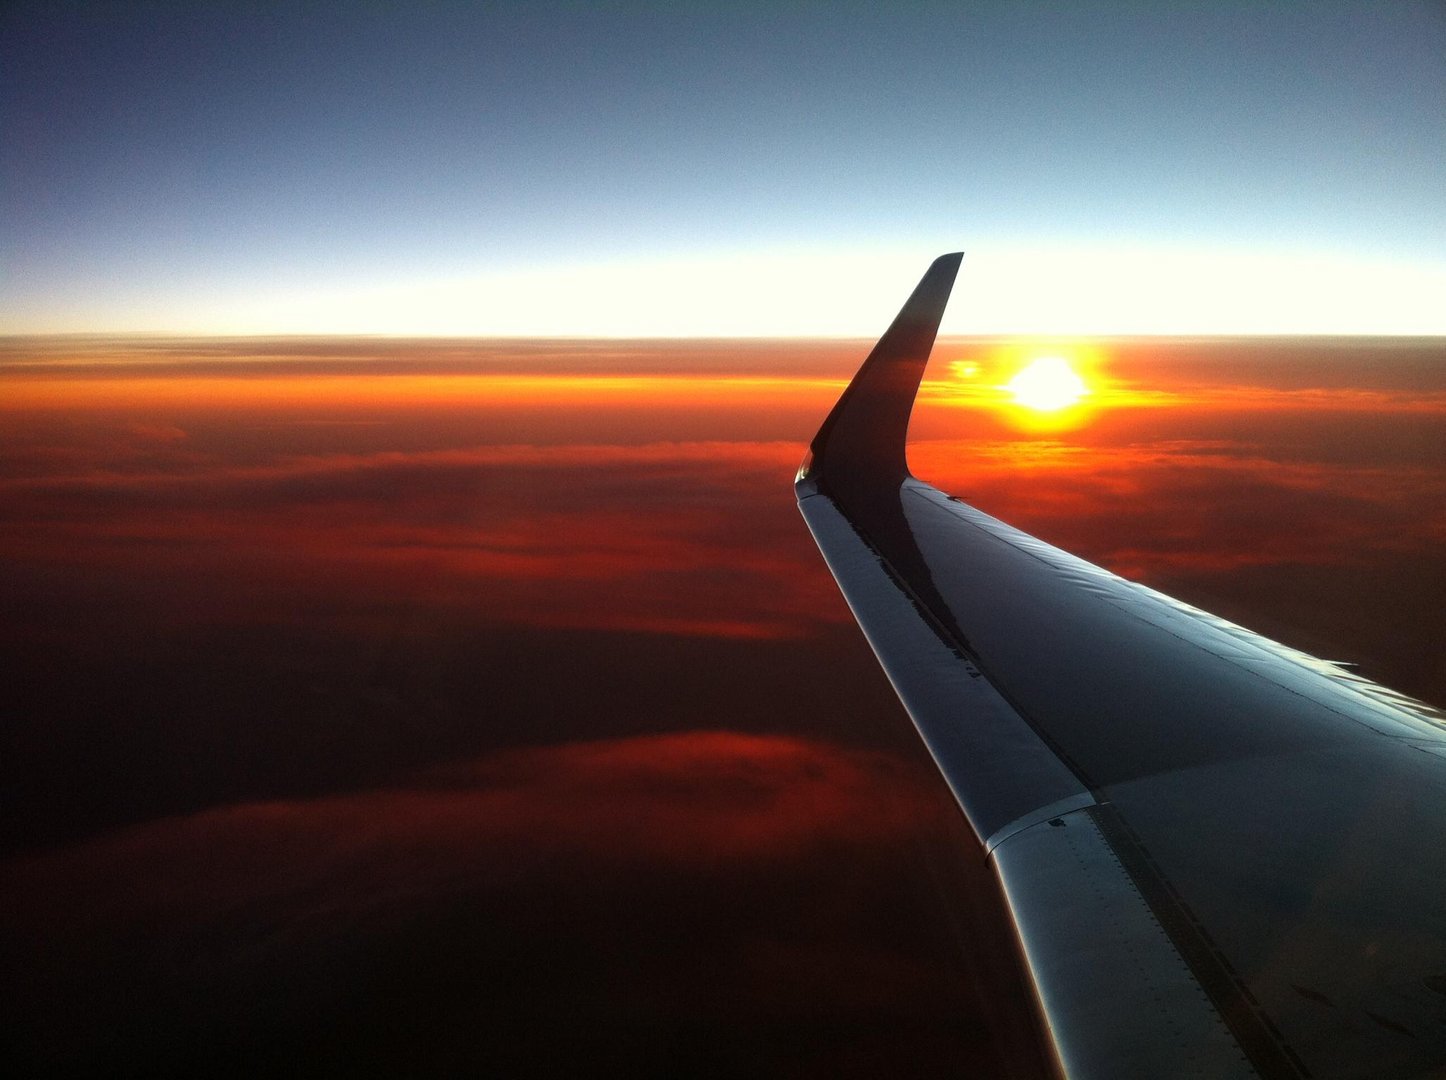 Wing (Airplane) at Sunset